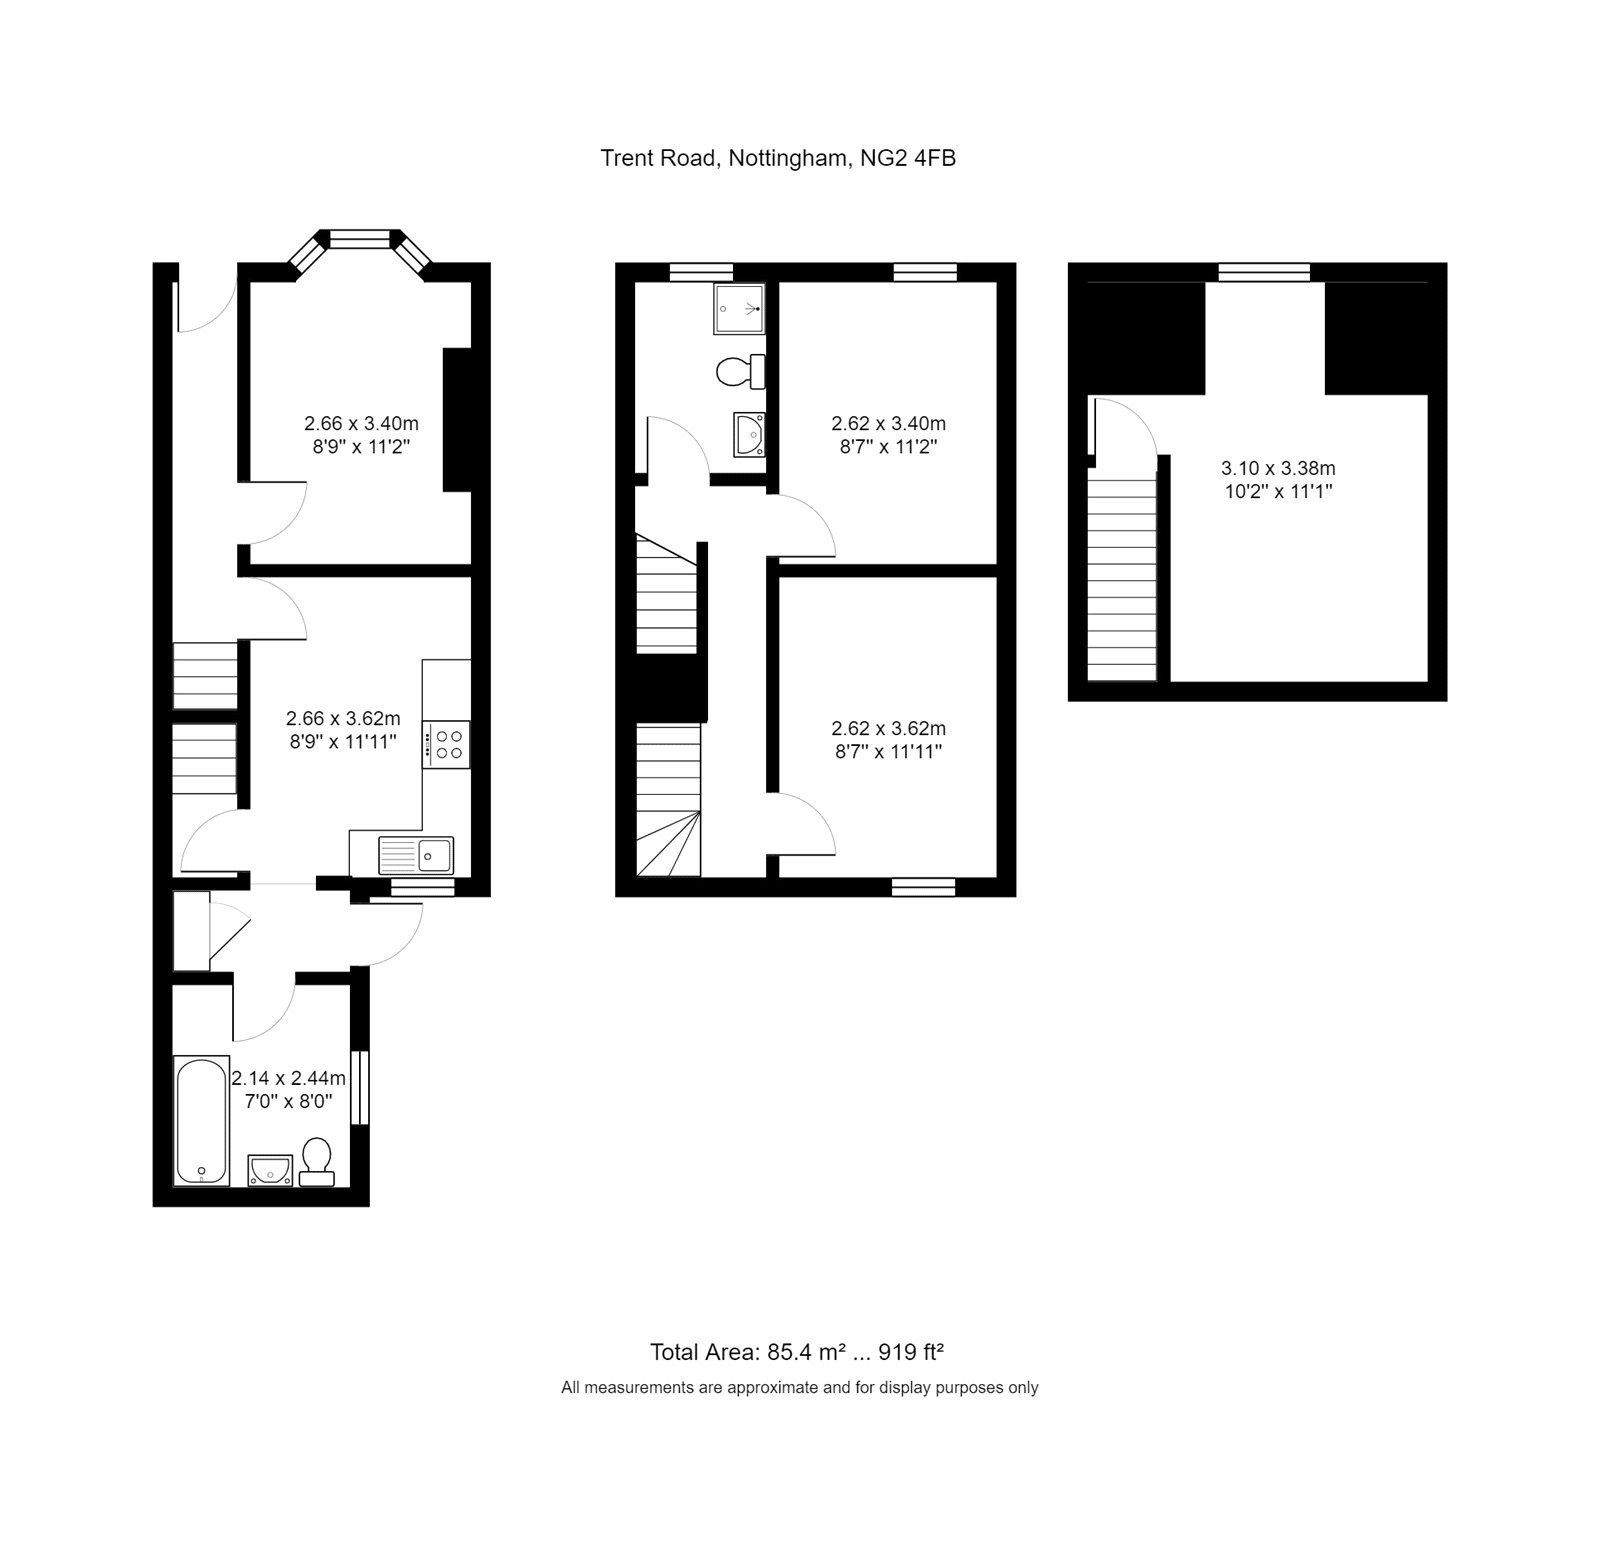 3 bed house to rent in Trent Road, Nottingham - Property Floorplan